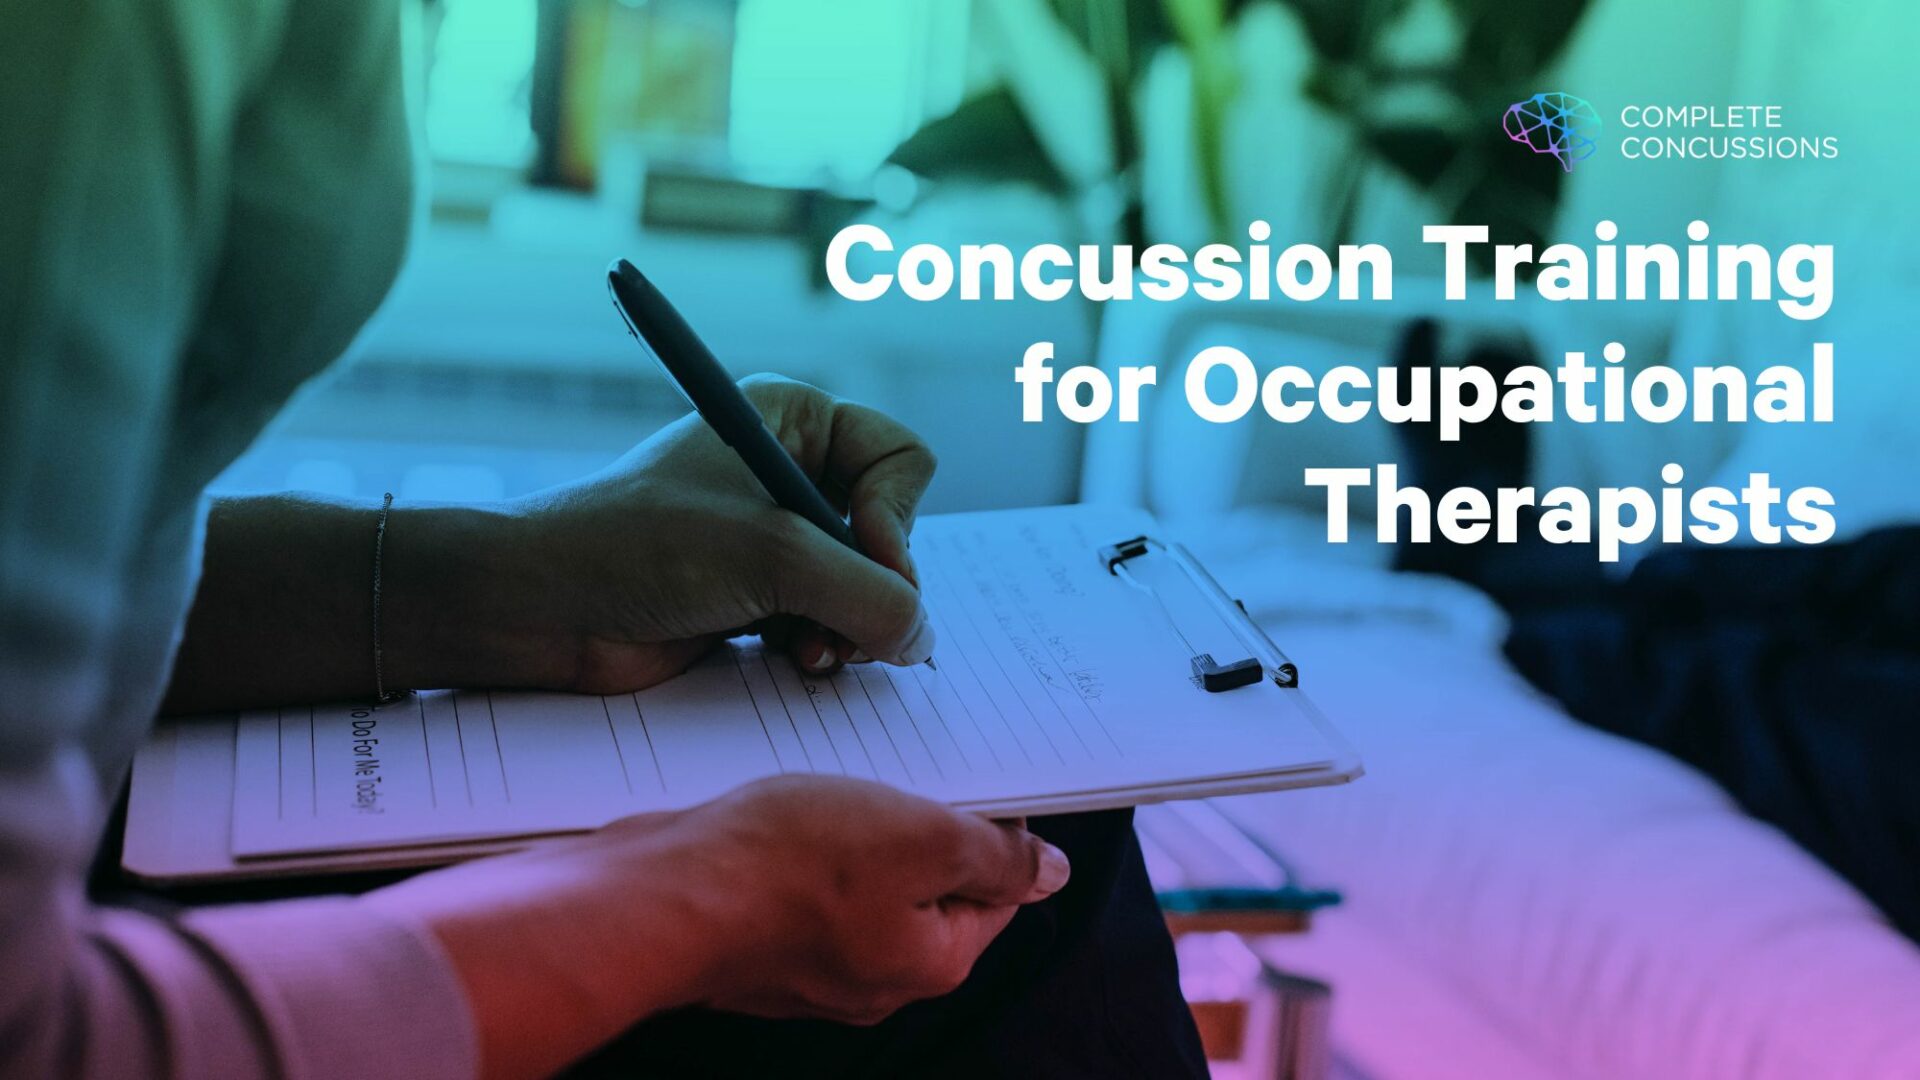 Concussion Training for Occupational Therapists